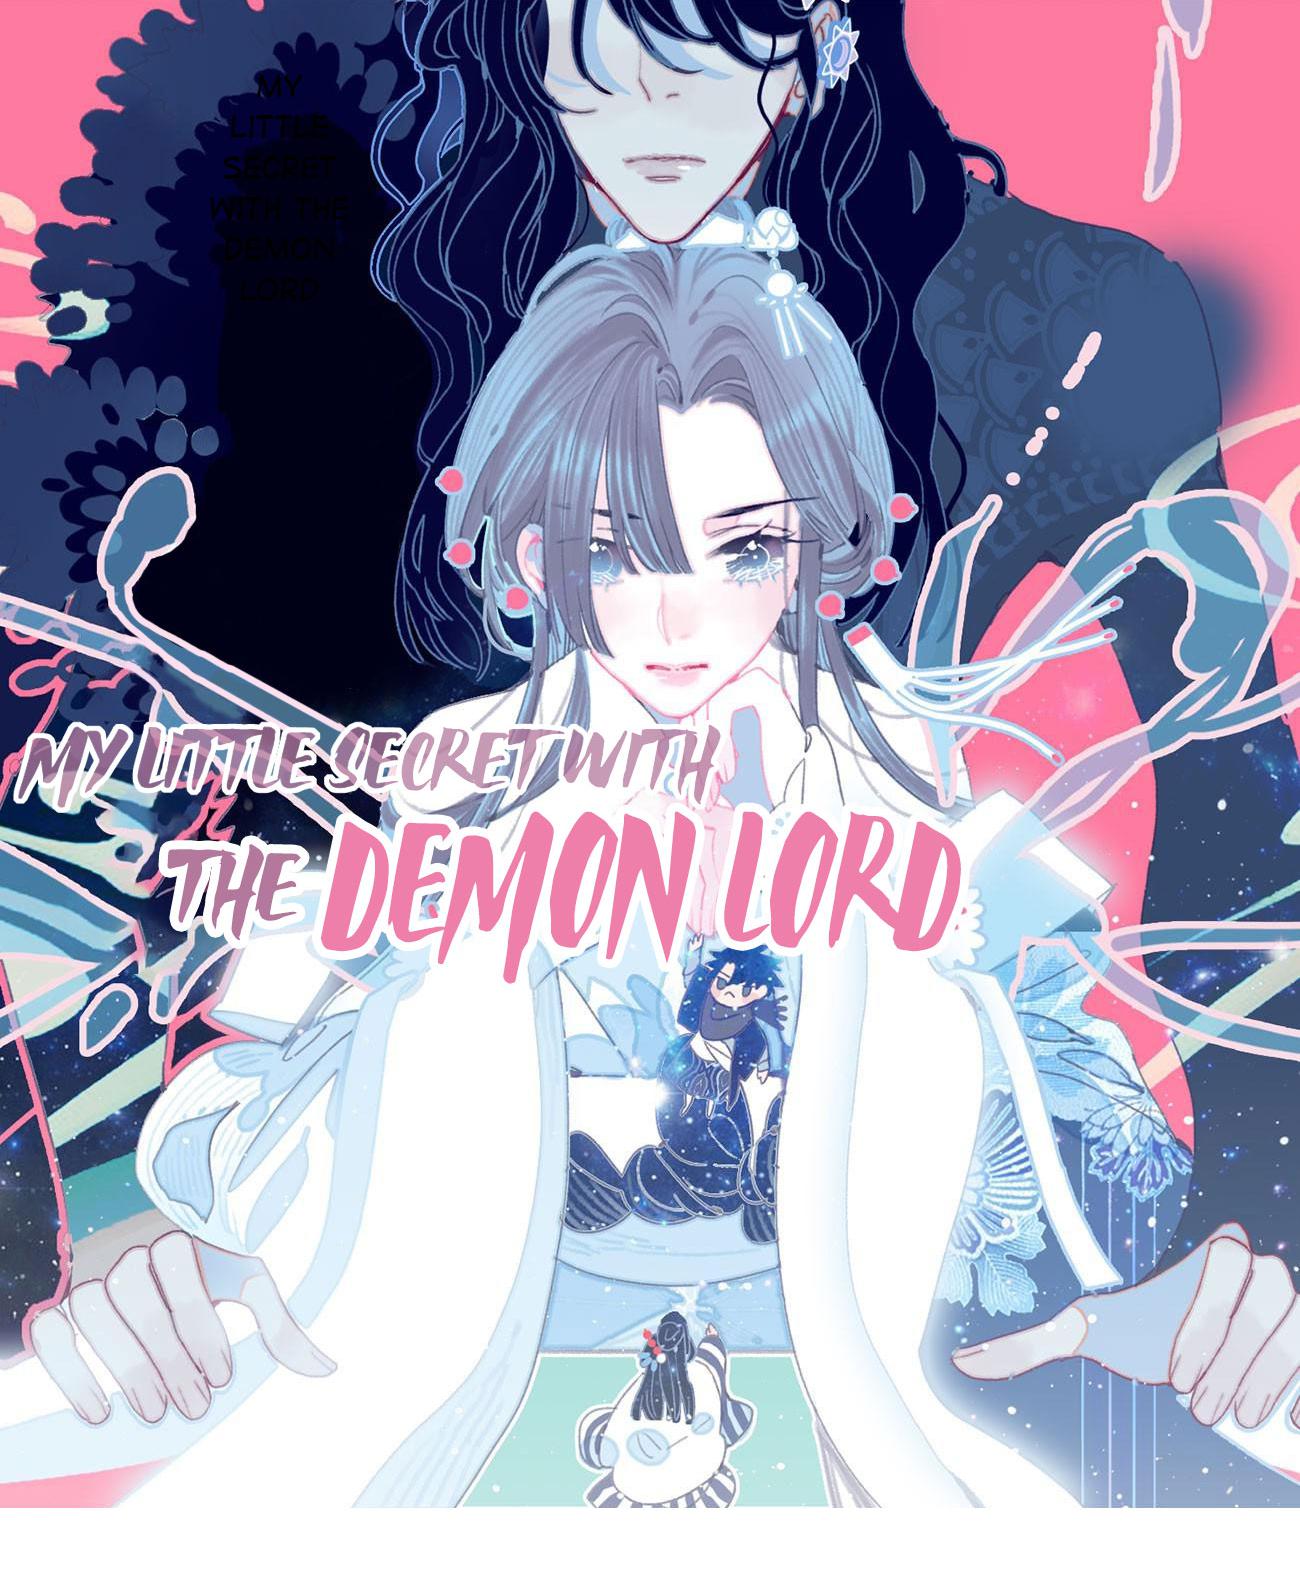 My Little Secret With the Demon Lord 14 Is Your Affectionate Persona Crumbling?